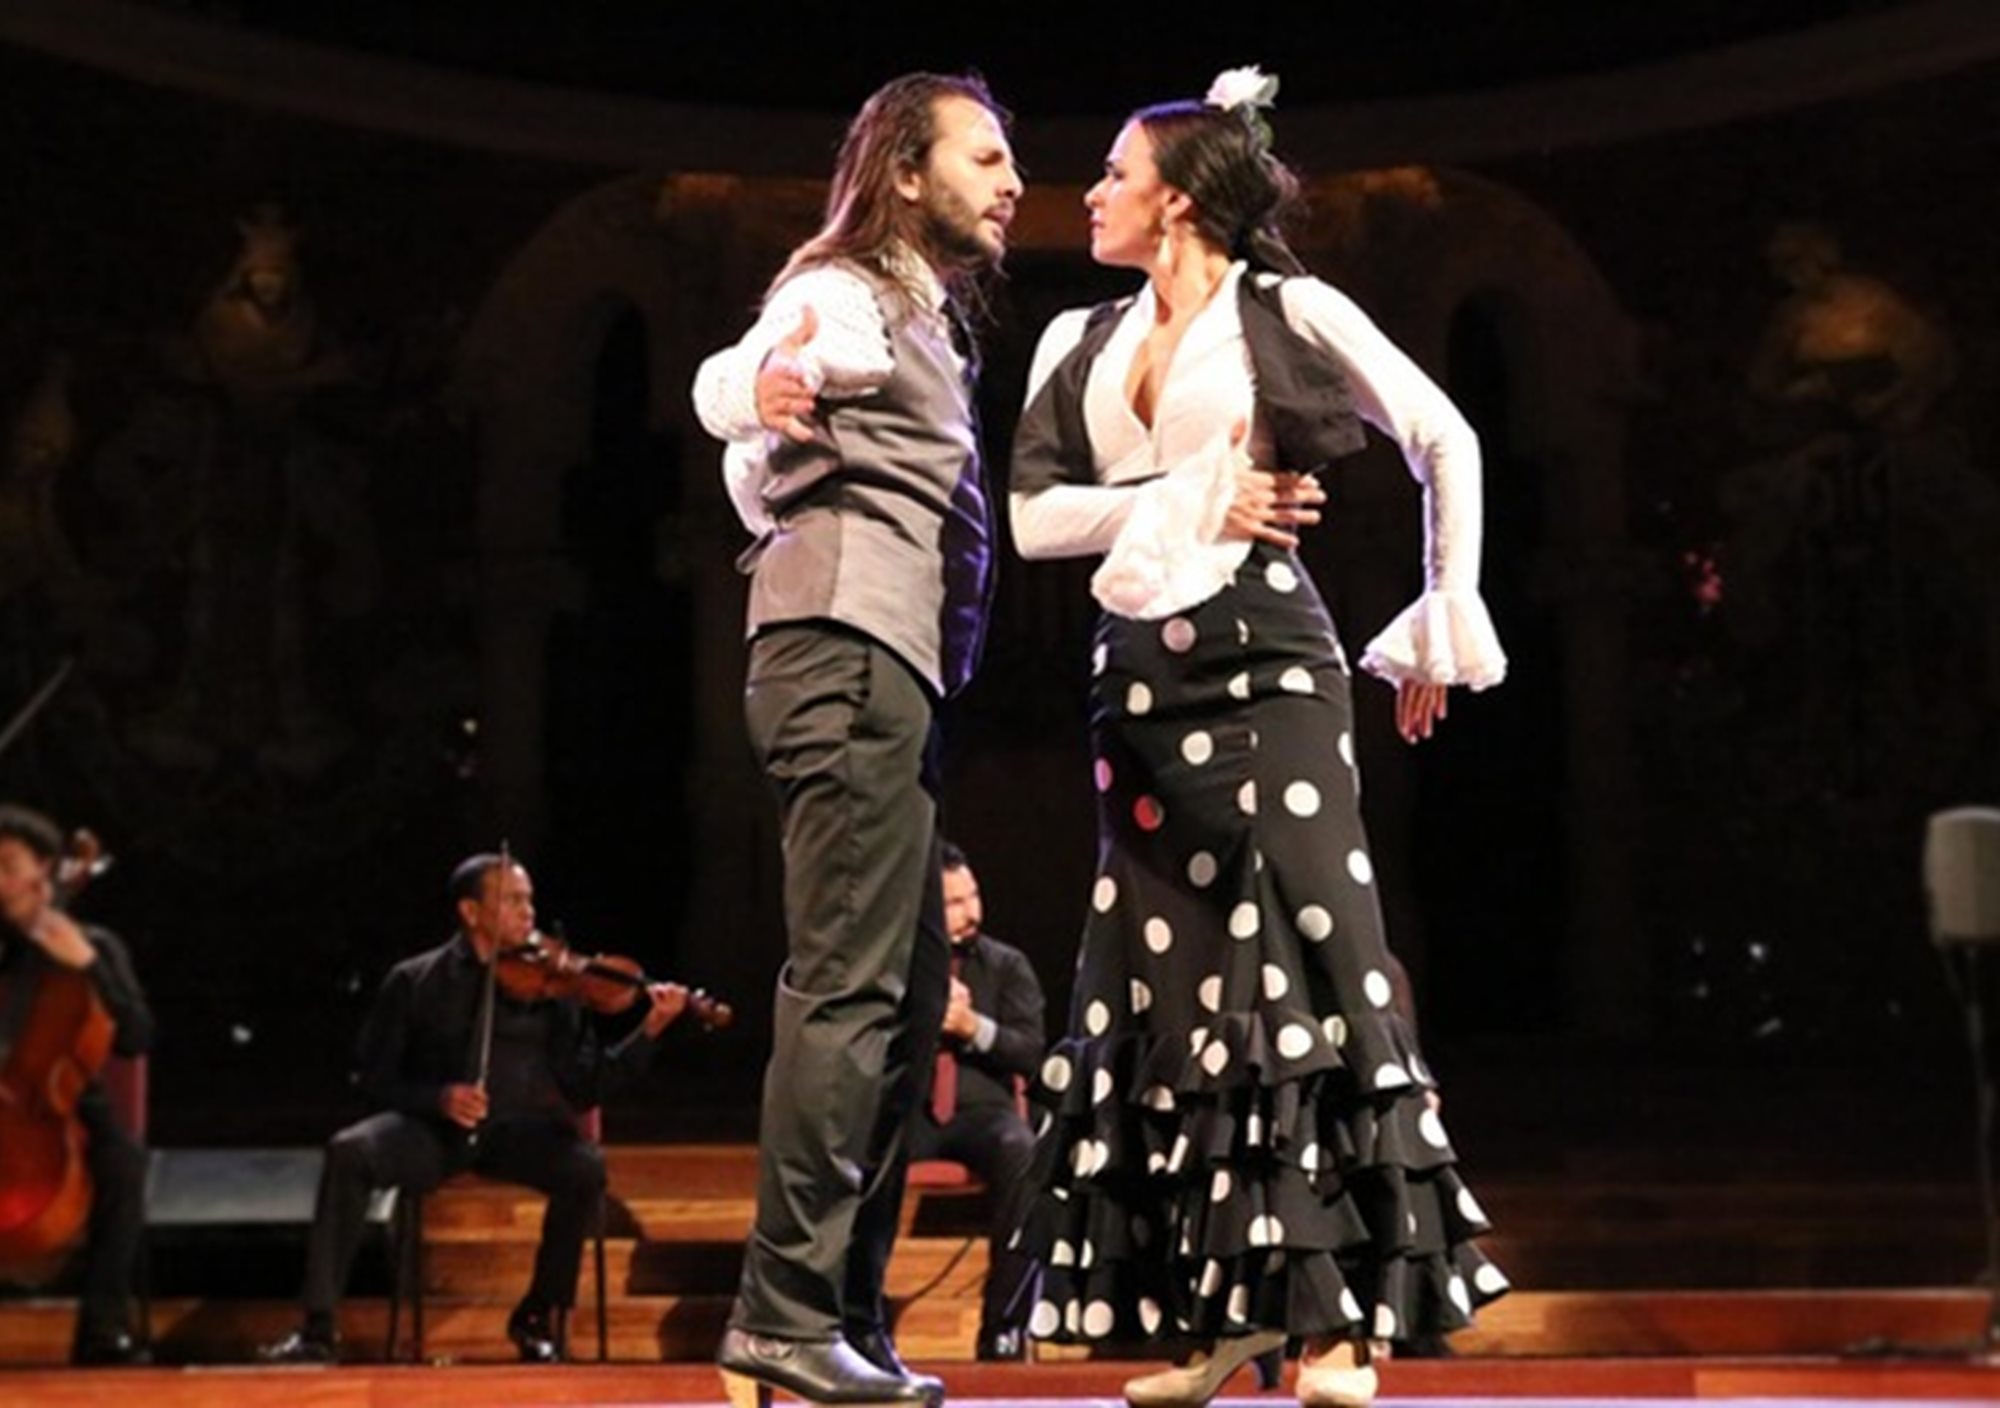 Opera & Flamenco show in Teatre Poliorama barcelona tickets visits get purchase book online